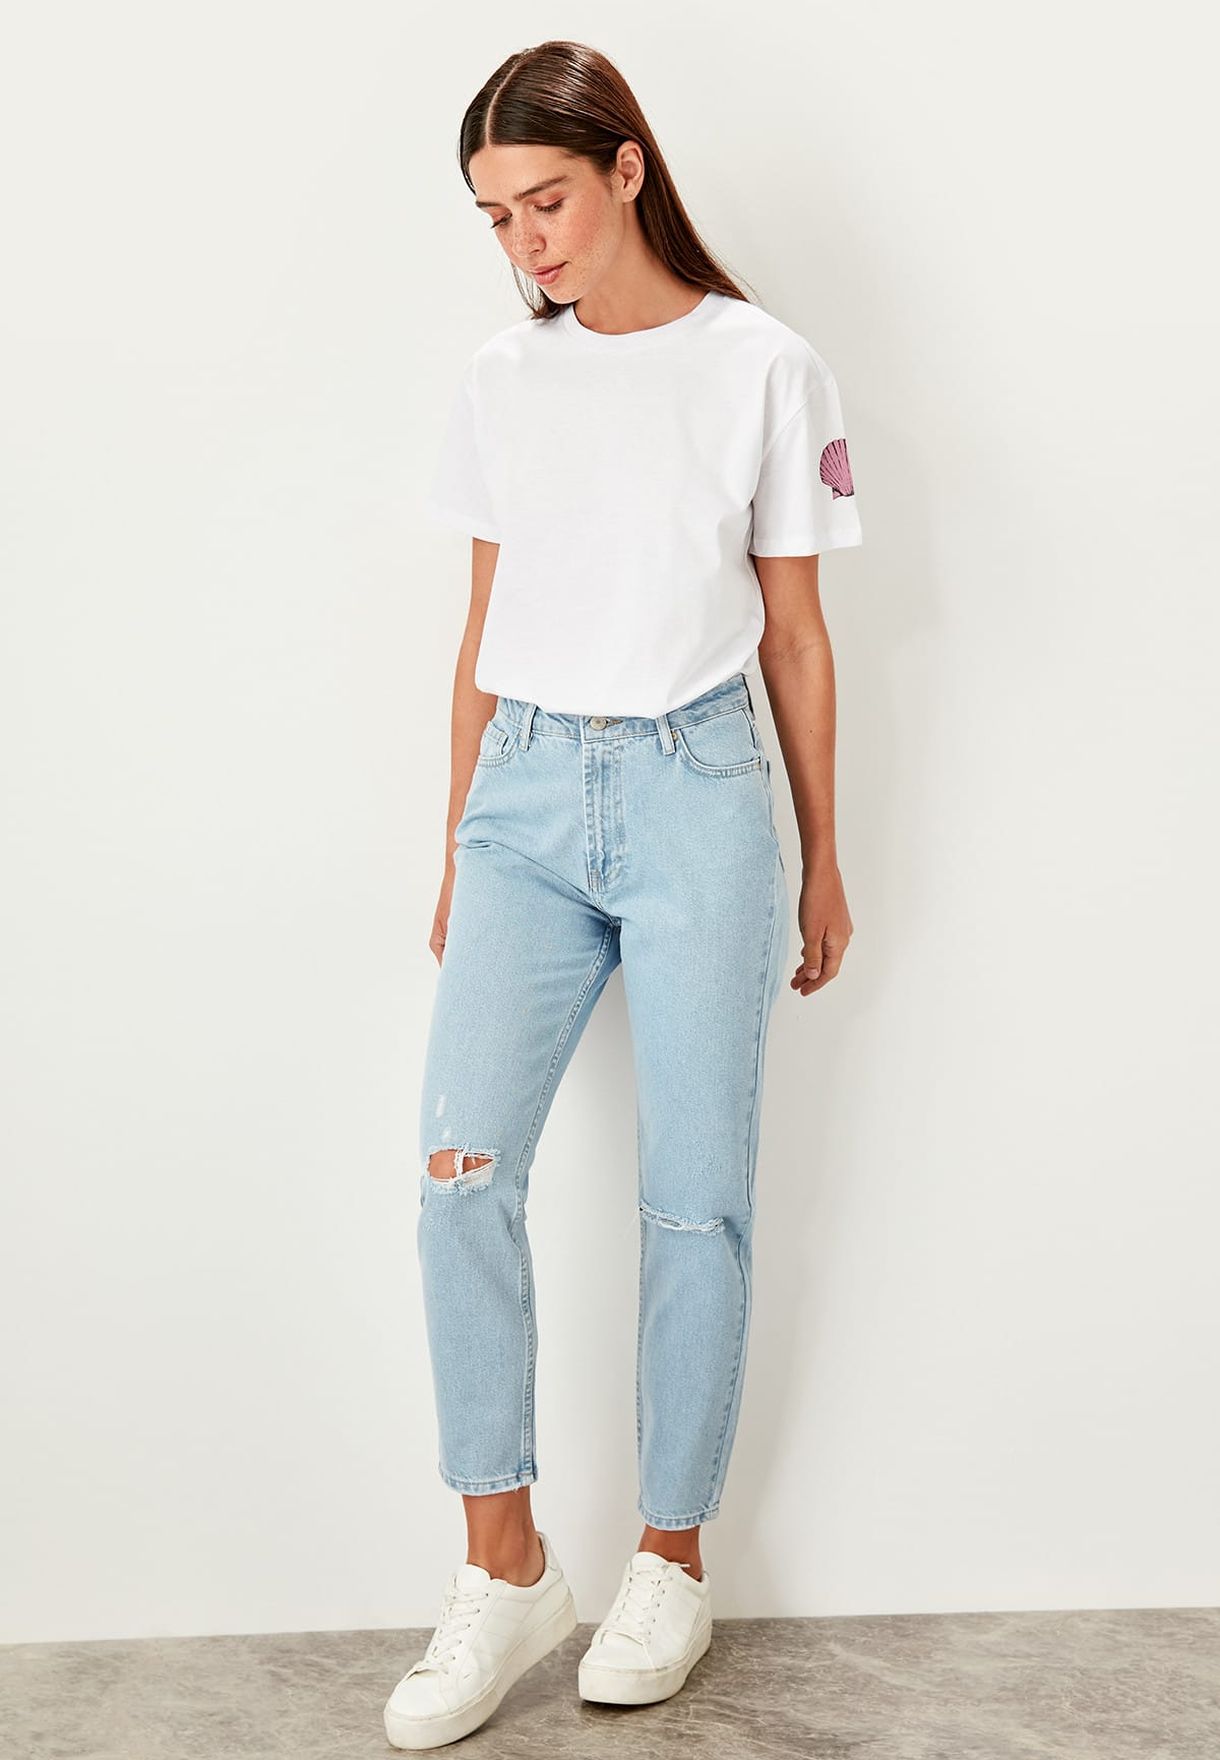 one knee cut jeans